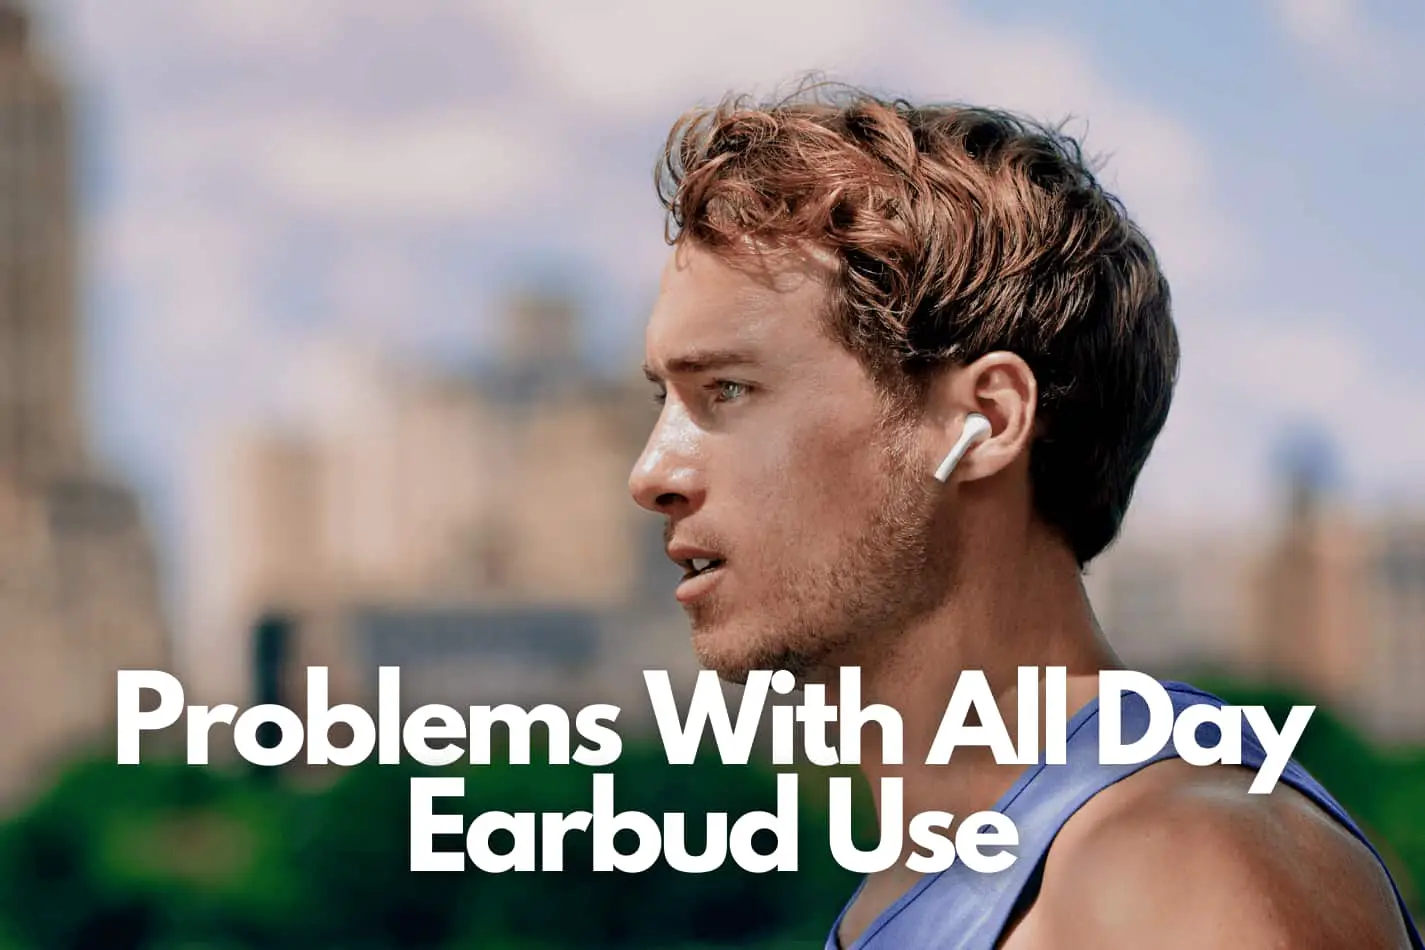 Athletic man wearing wireless earbuds in his ears while out in the city